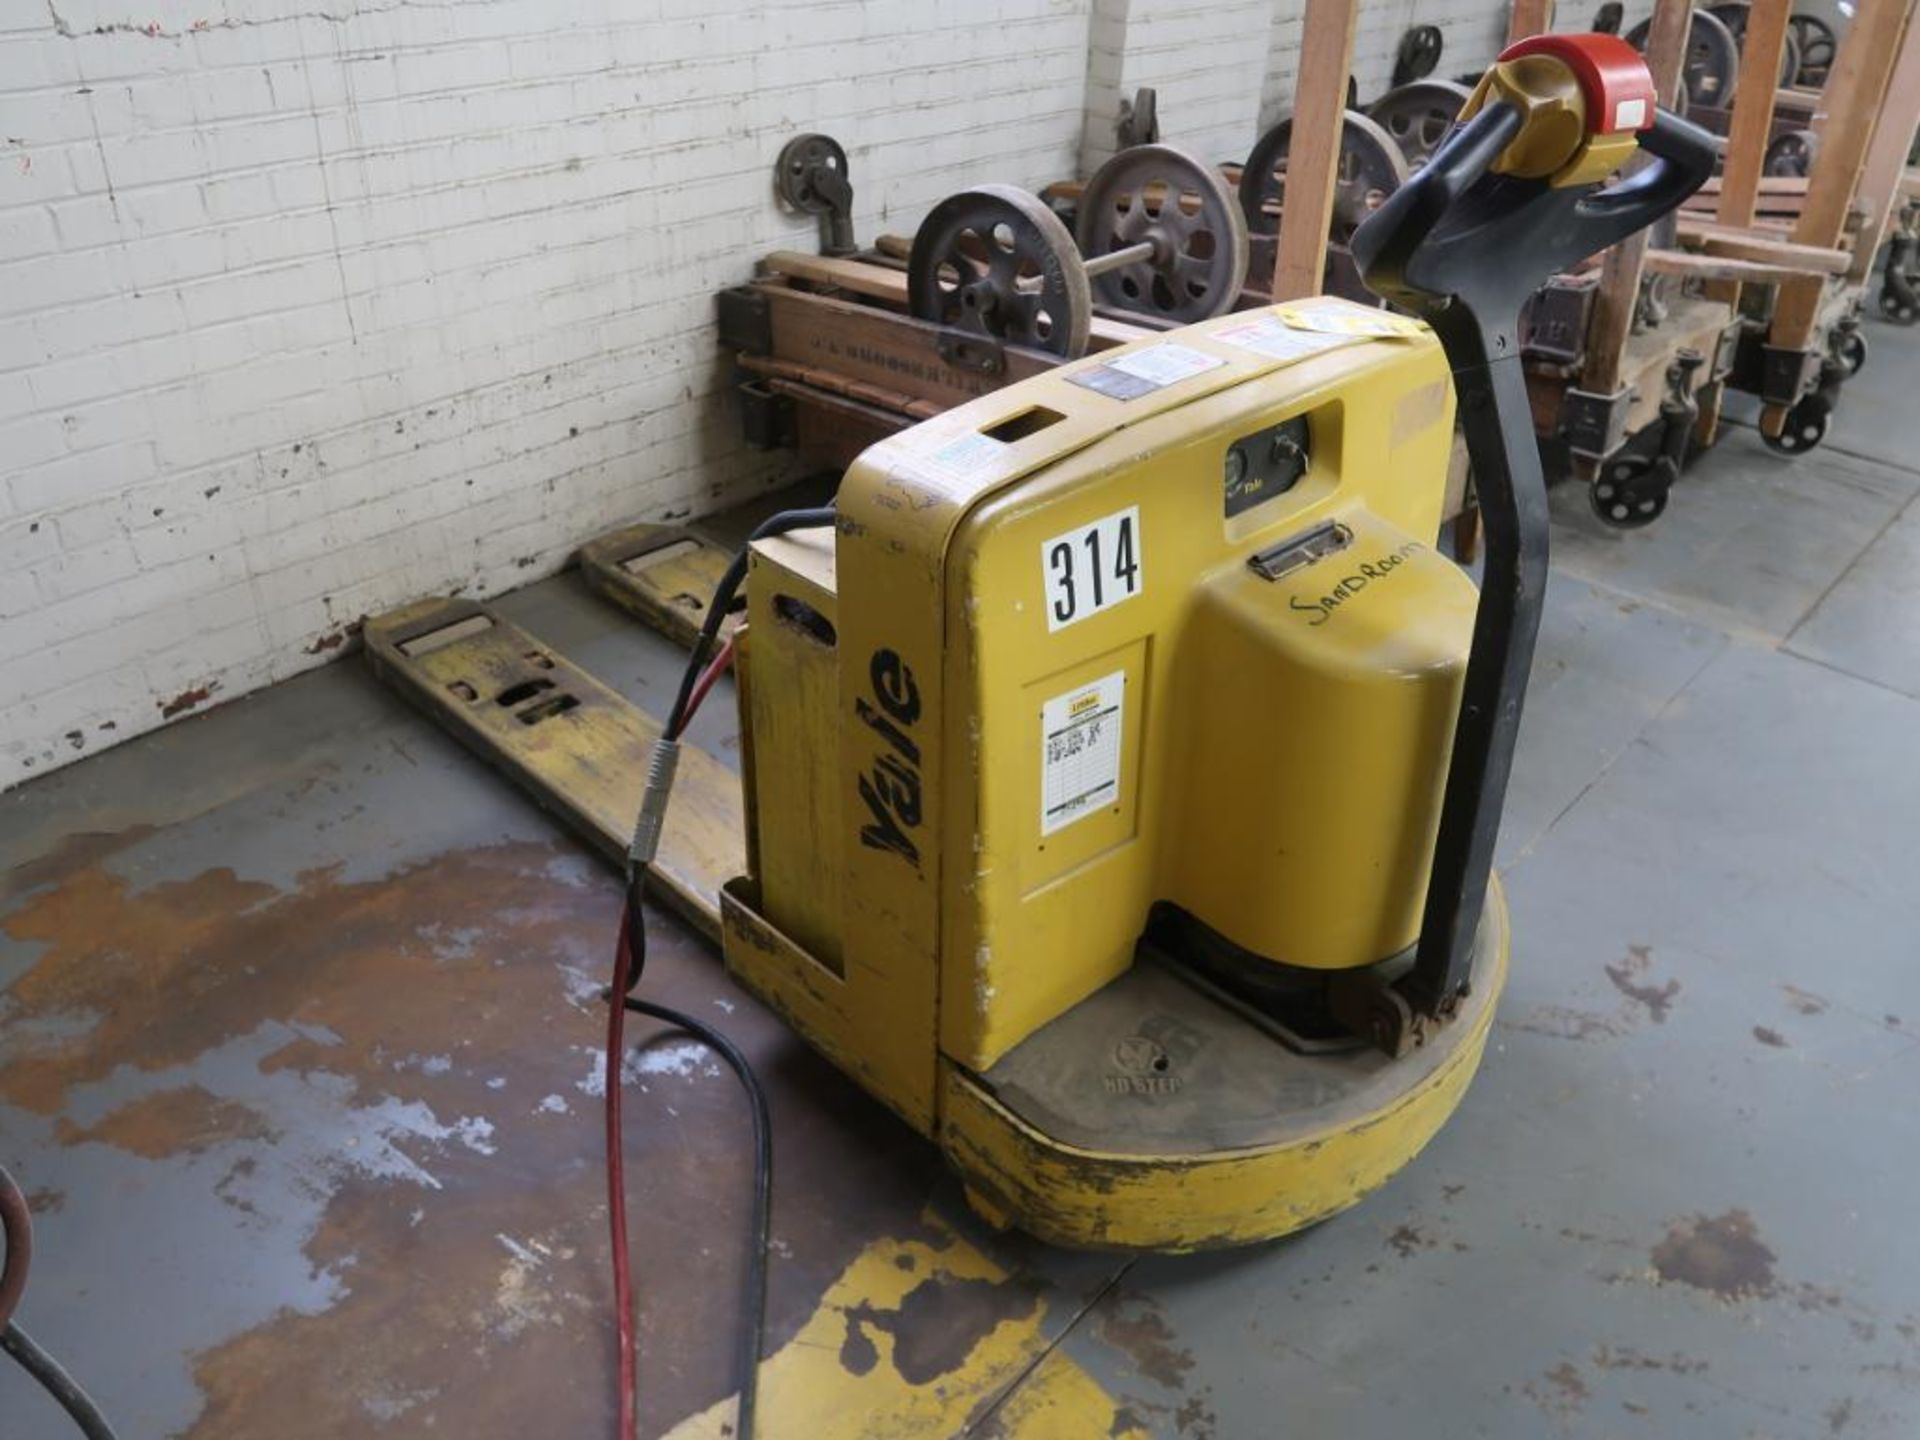 YALE 6500 lb. Electric Walk-Behind Pallet Truck (#314)